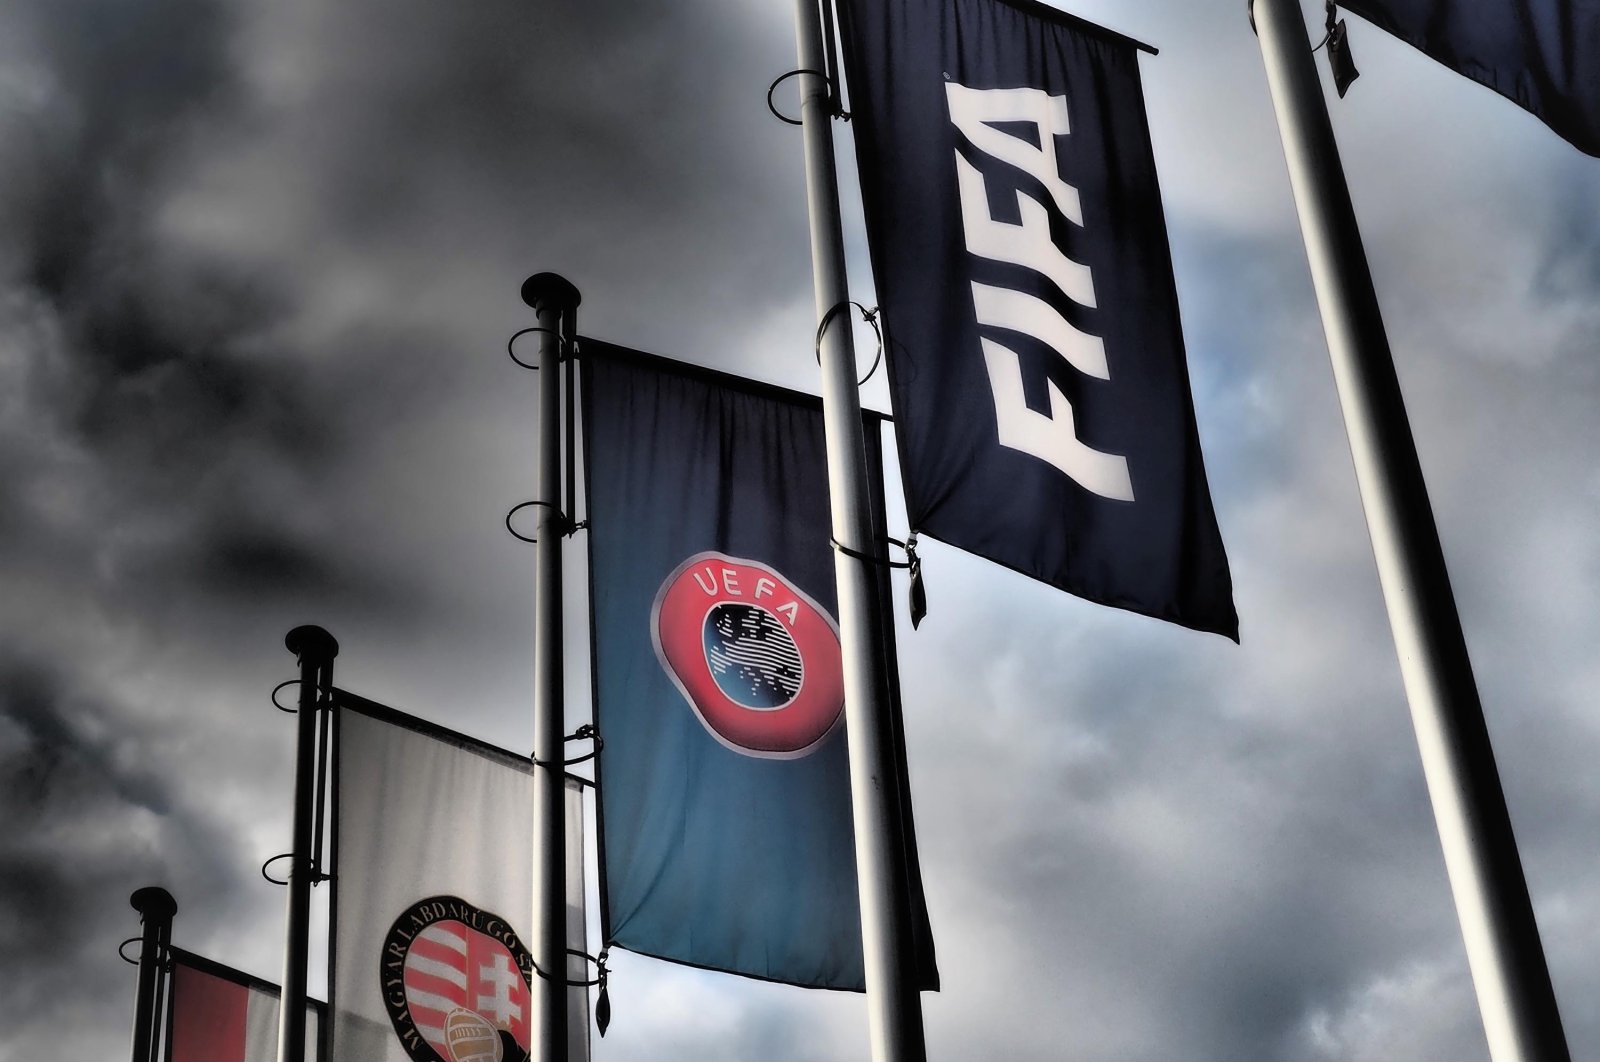 FIFA and UEFA flags hang in front of the Hungarian Football Association, in Budapest, Hungary, Oct. 19, 2020. (Shutterstock Photo)